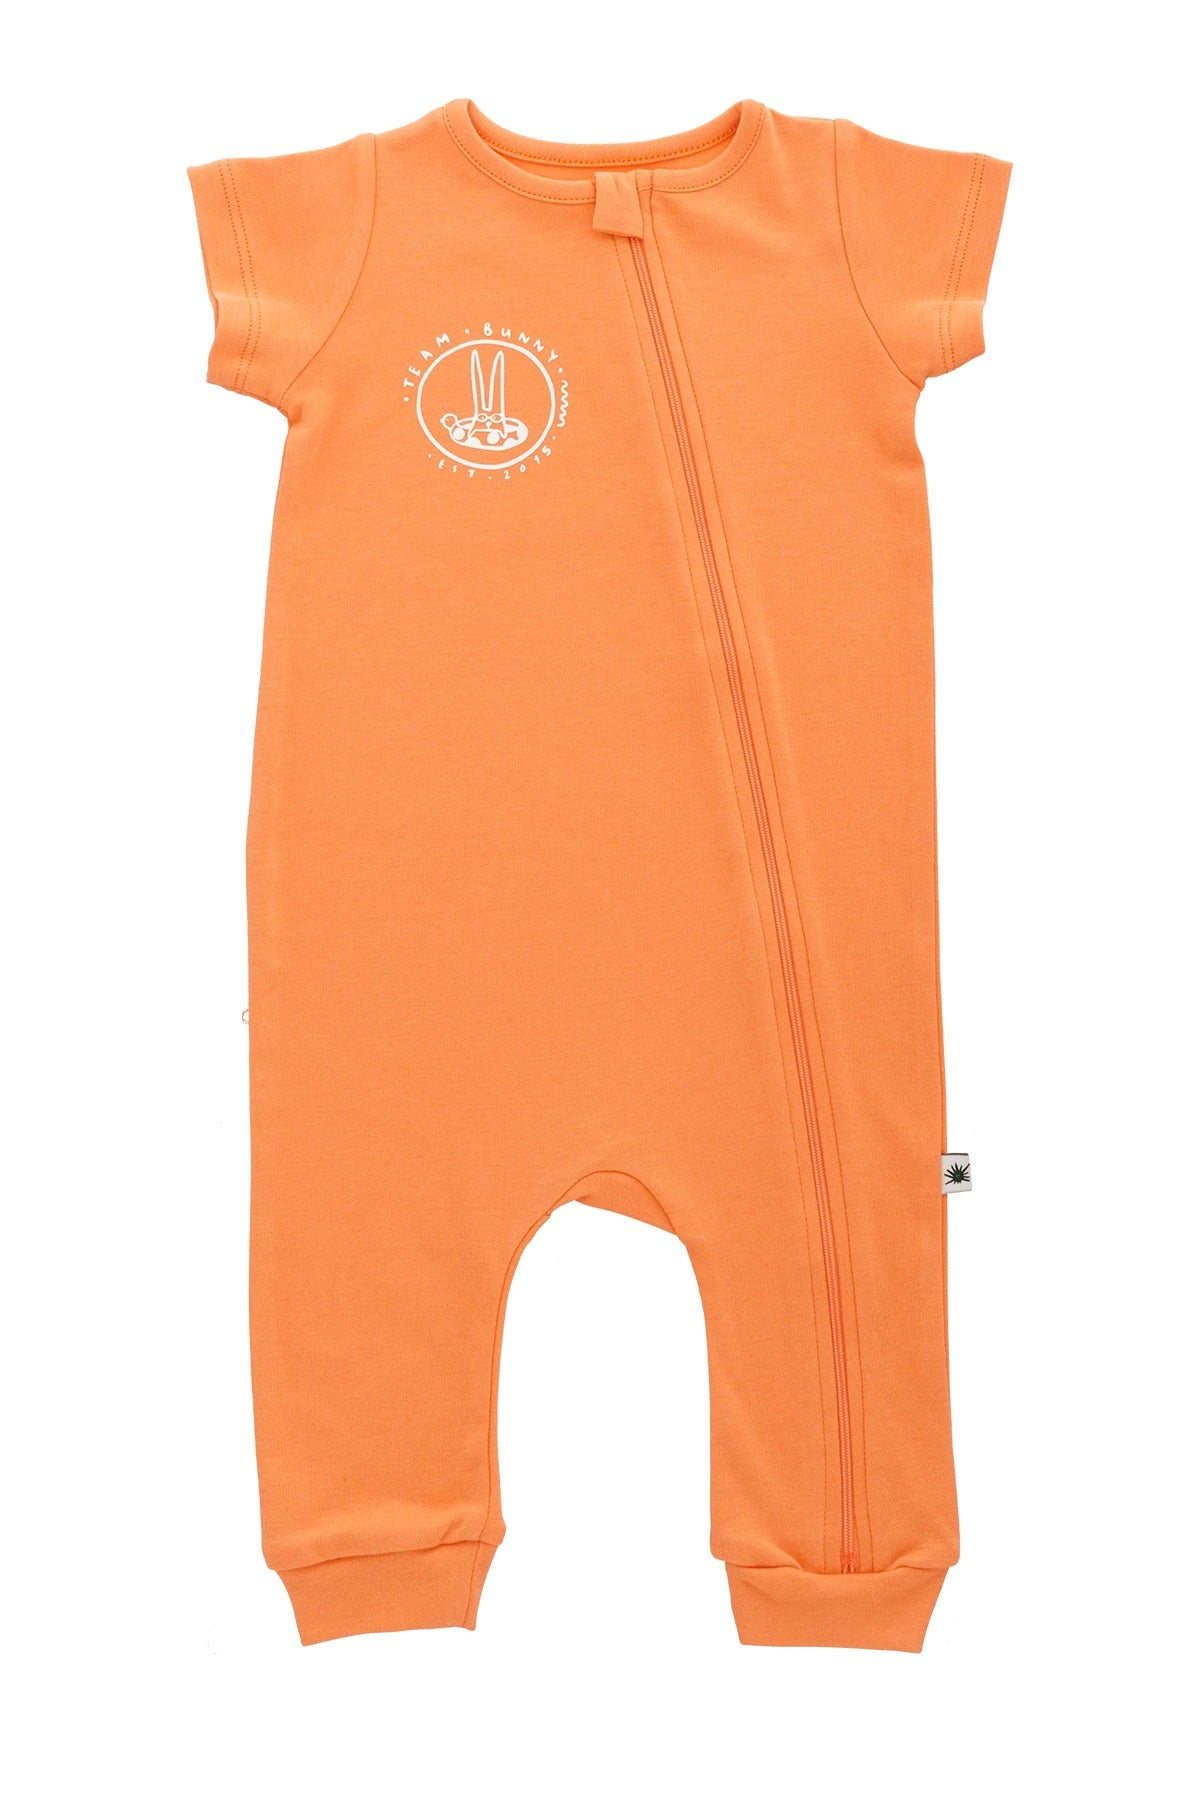 organic cotton short-sleeve, non-footed, double fleece jumpsuit with a two way zipper